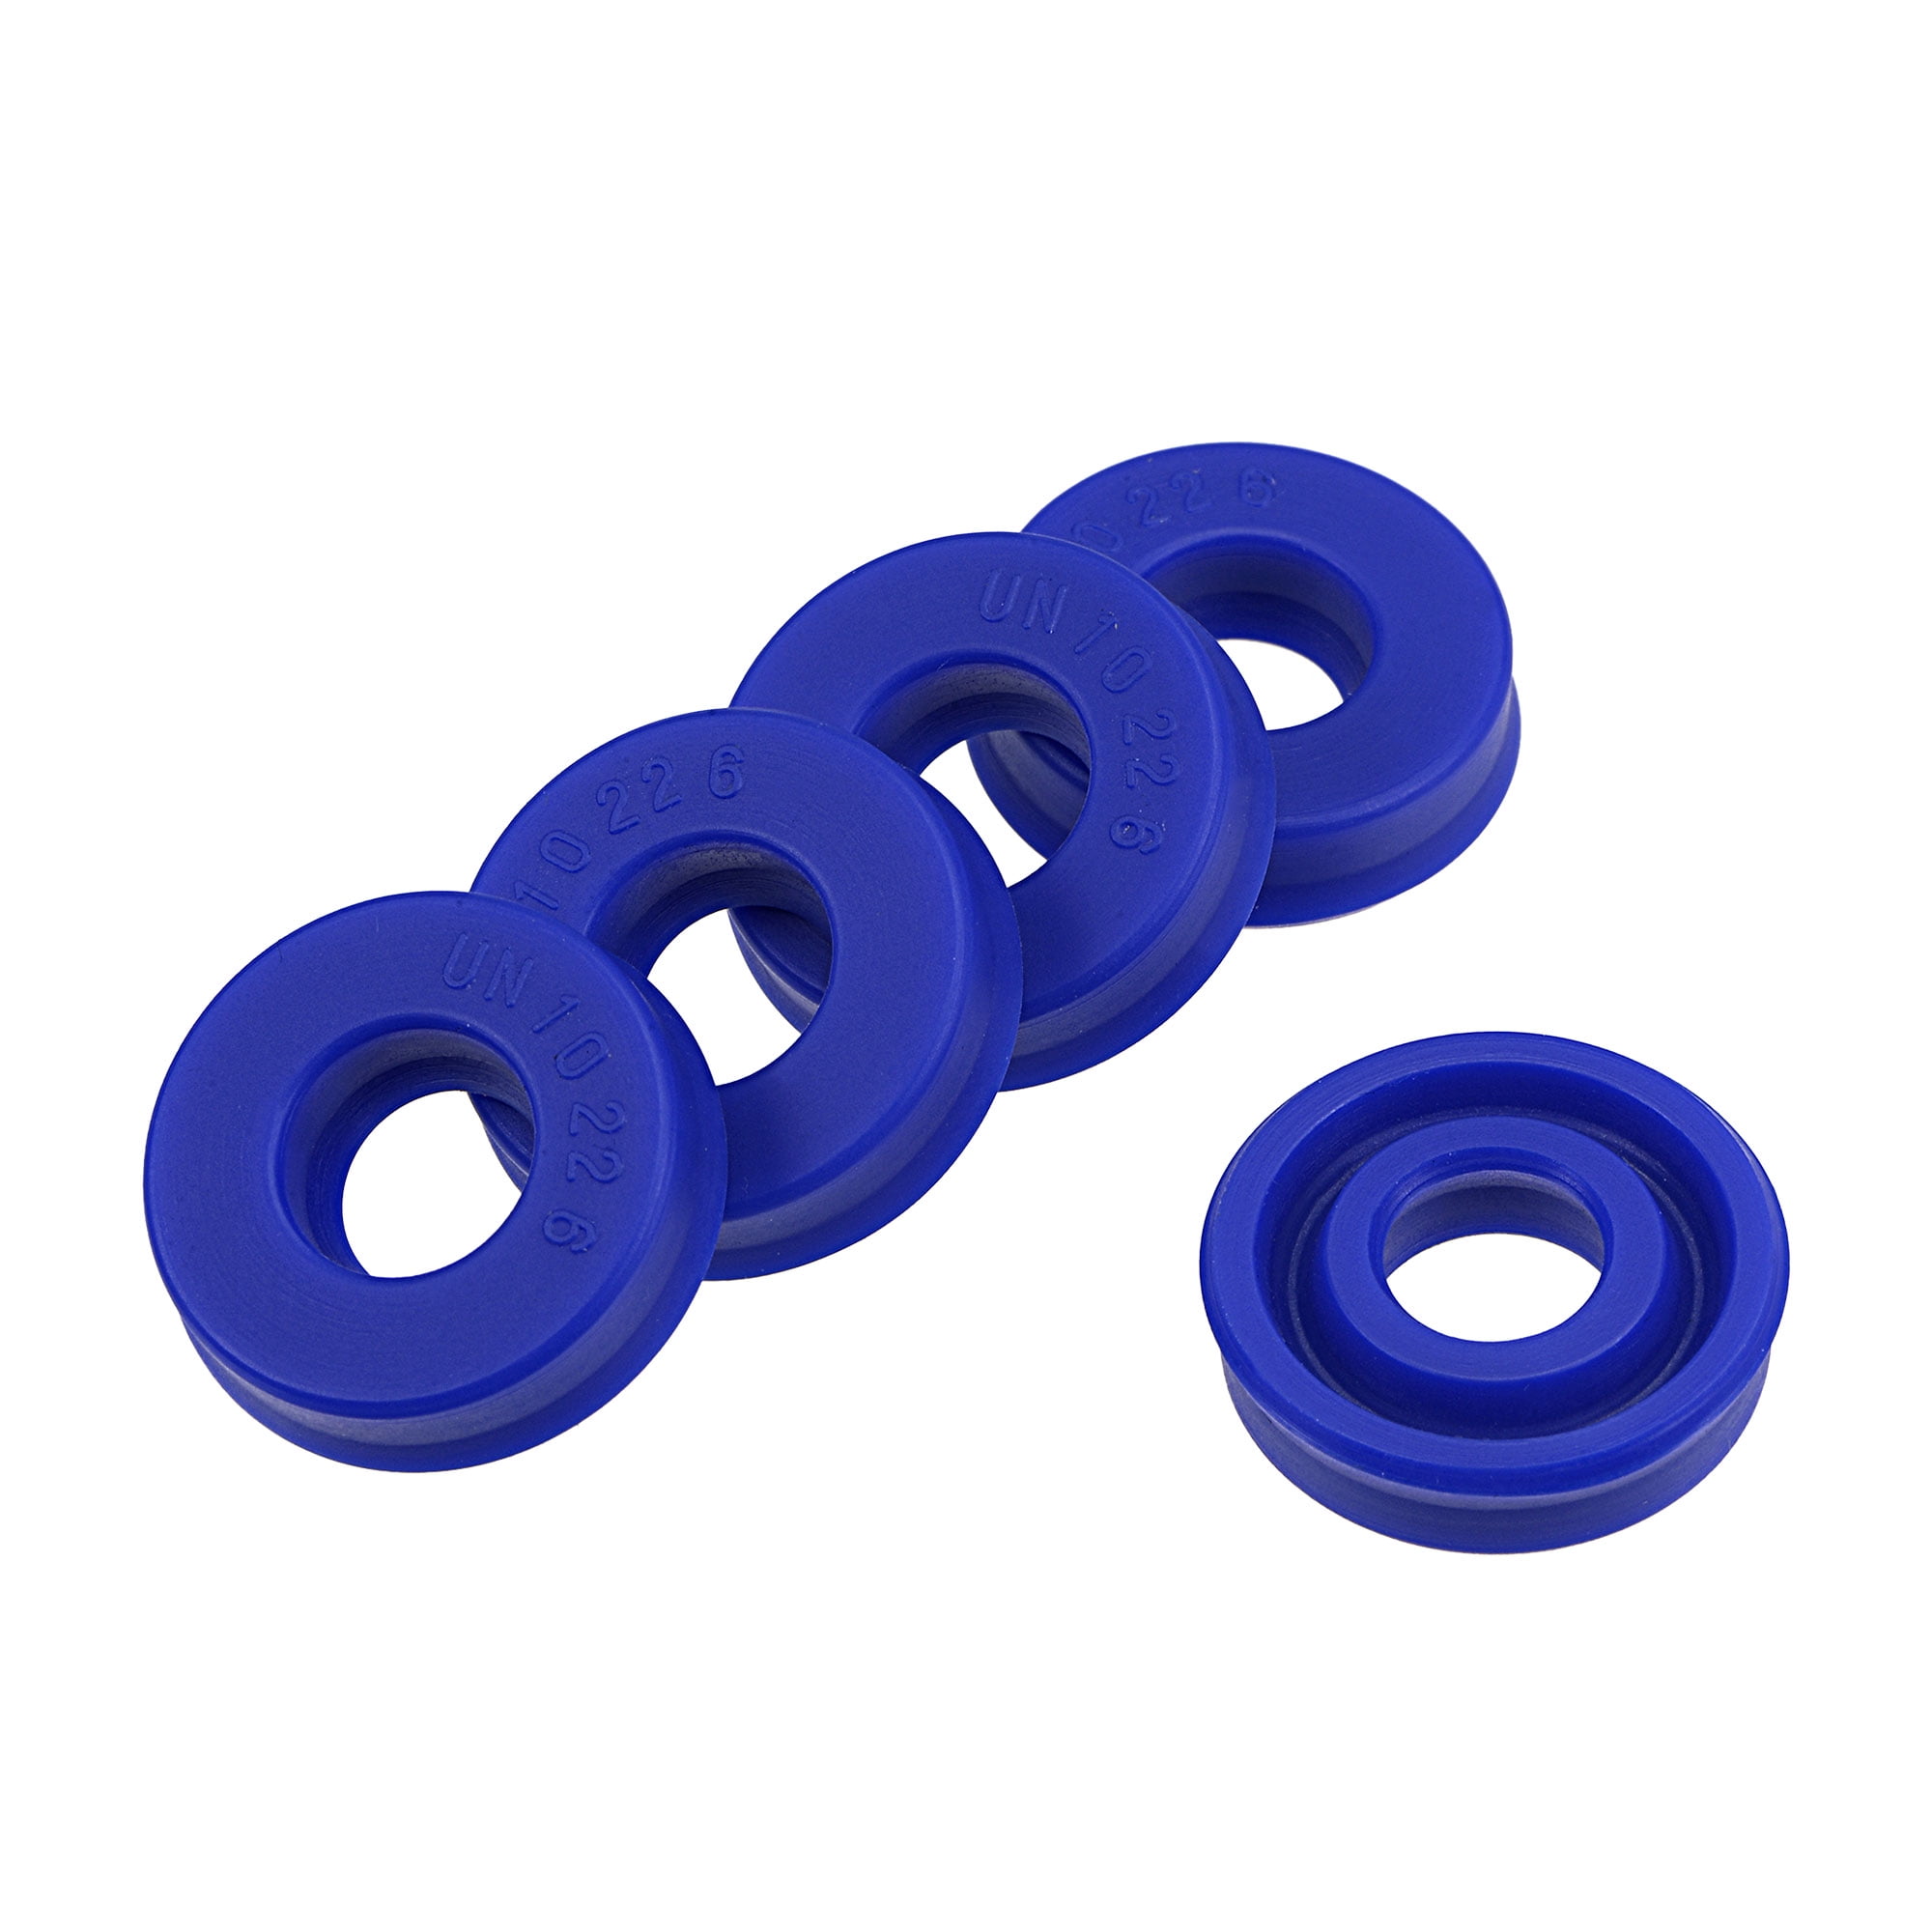 Uxcell 40mm x 48mm x 6mm UN Type Radial Shaft Oil Seal PU Blue 5 Count 